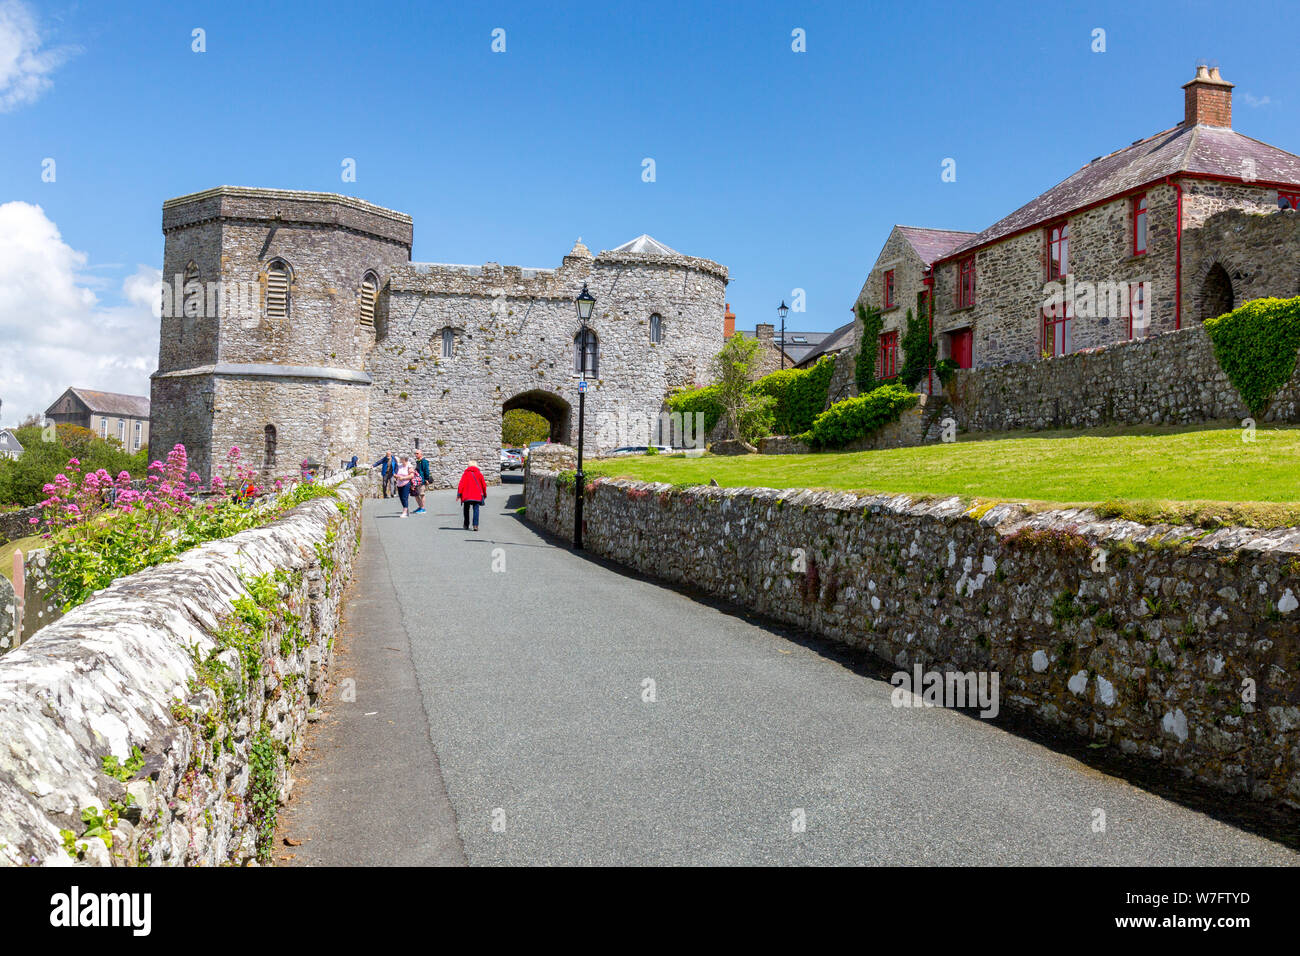 The historic 14th century Tower Gate in St Davids, Pembrokeshire, Wales, UK Stock Photo